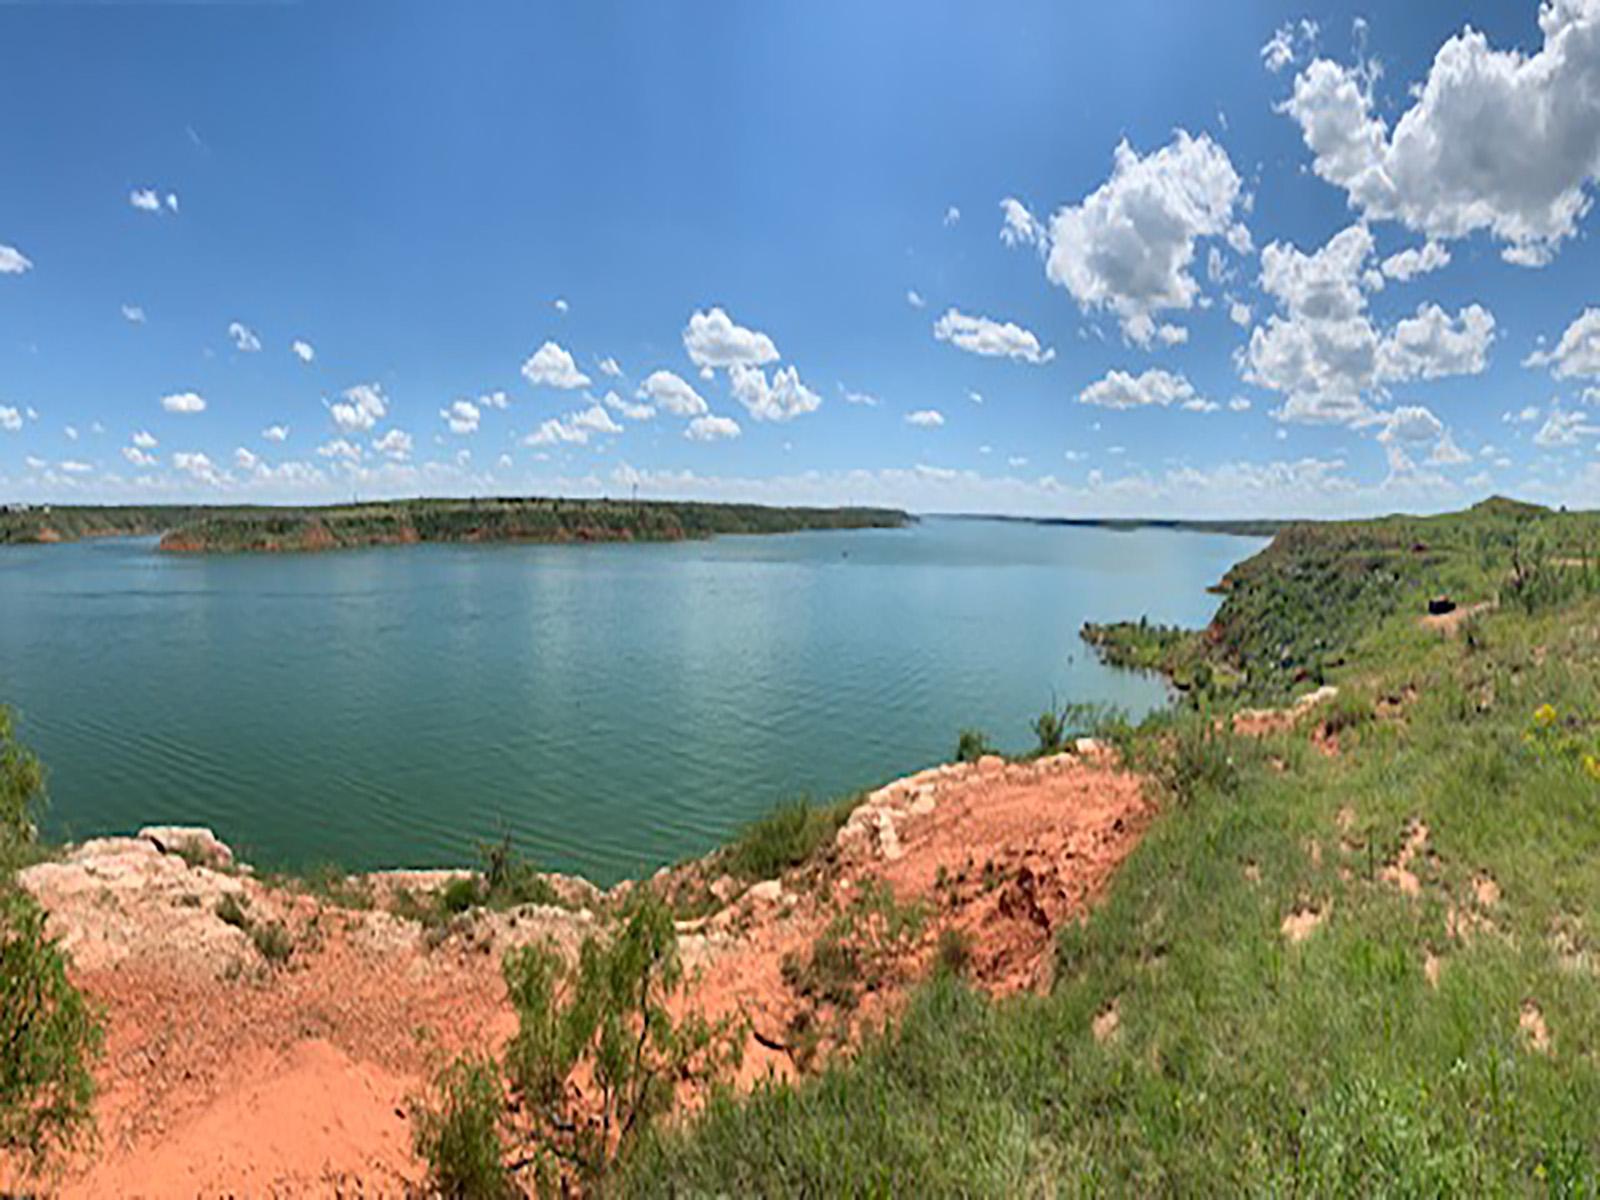 View from a mesa of Lake Meredith.  The sky is blue with a few white clouds.